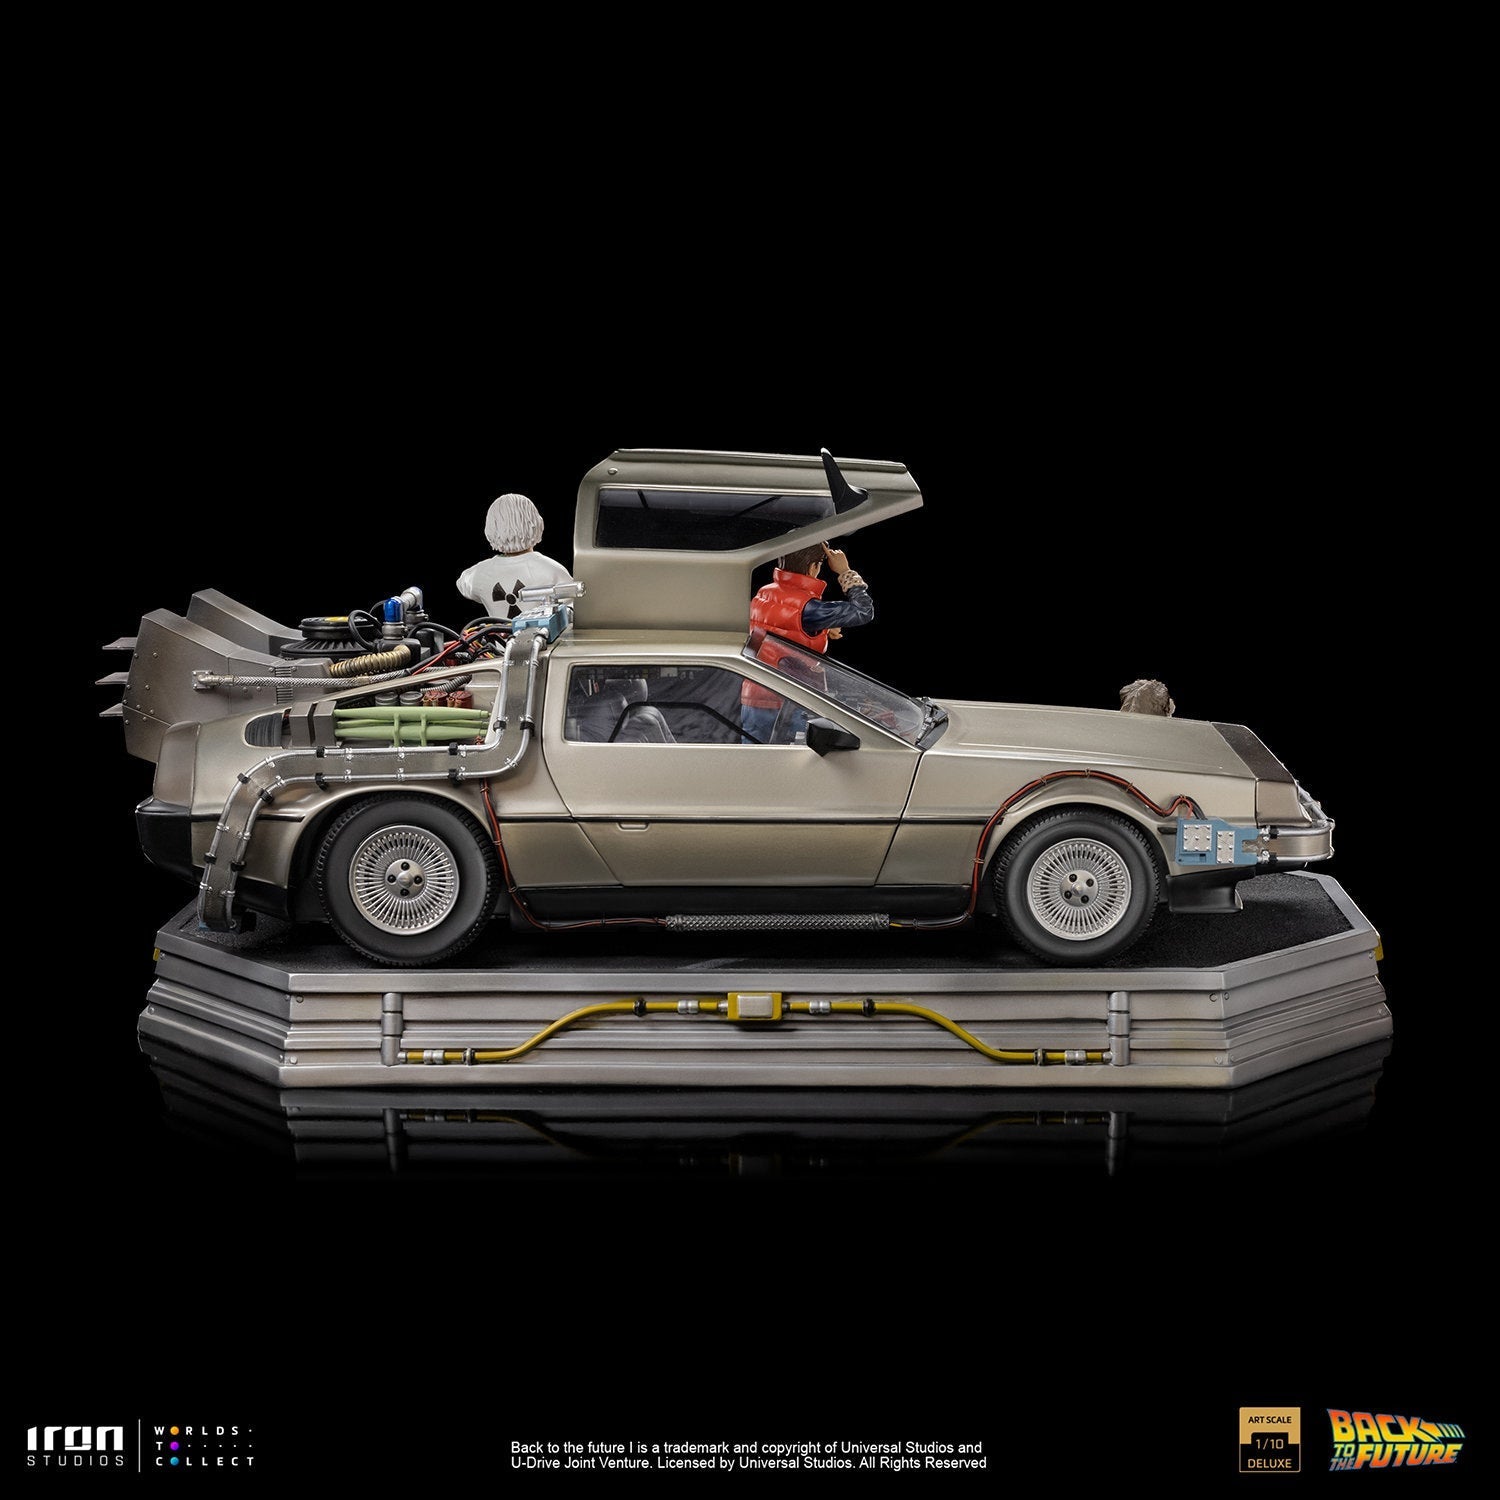 Statue Delorean Full Set Deluxe - Back To The Future II - Art Scale 1/10 -  Iron Studios - Iron Studios Official Store - Action figures, Collectibles